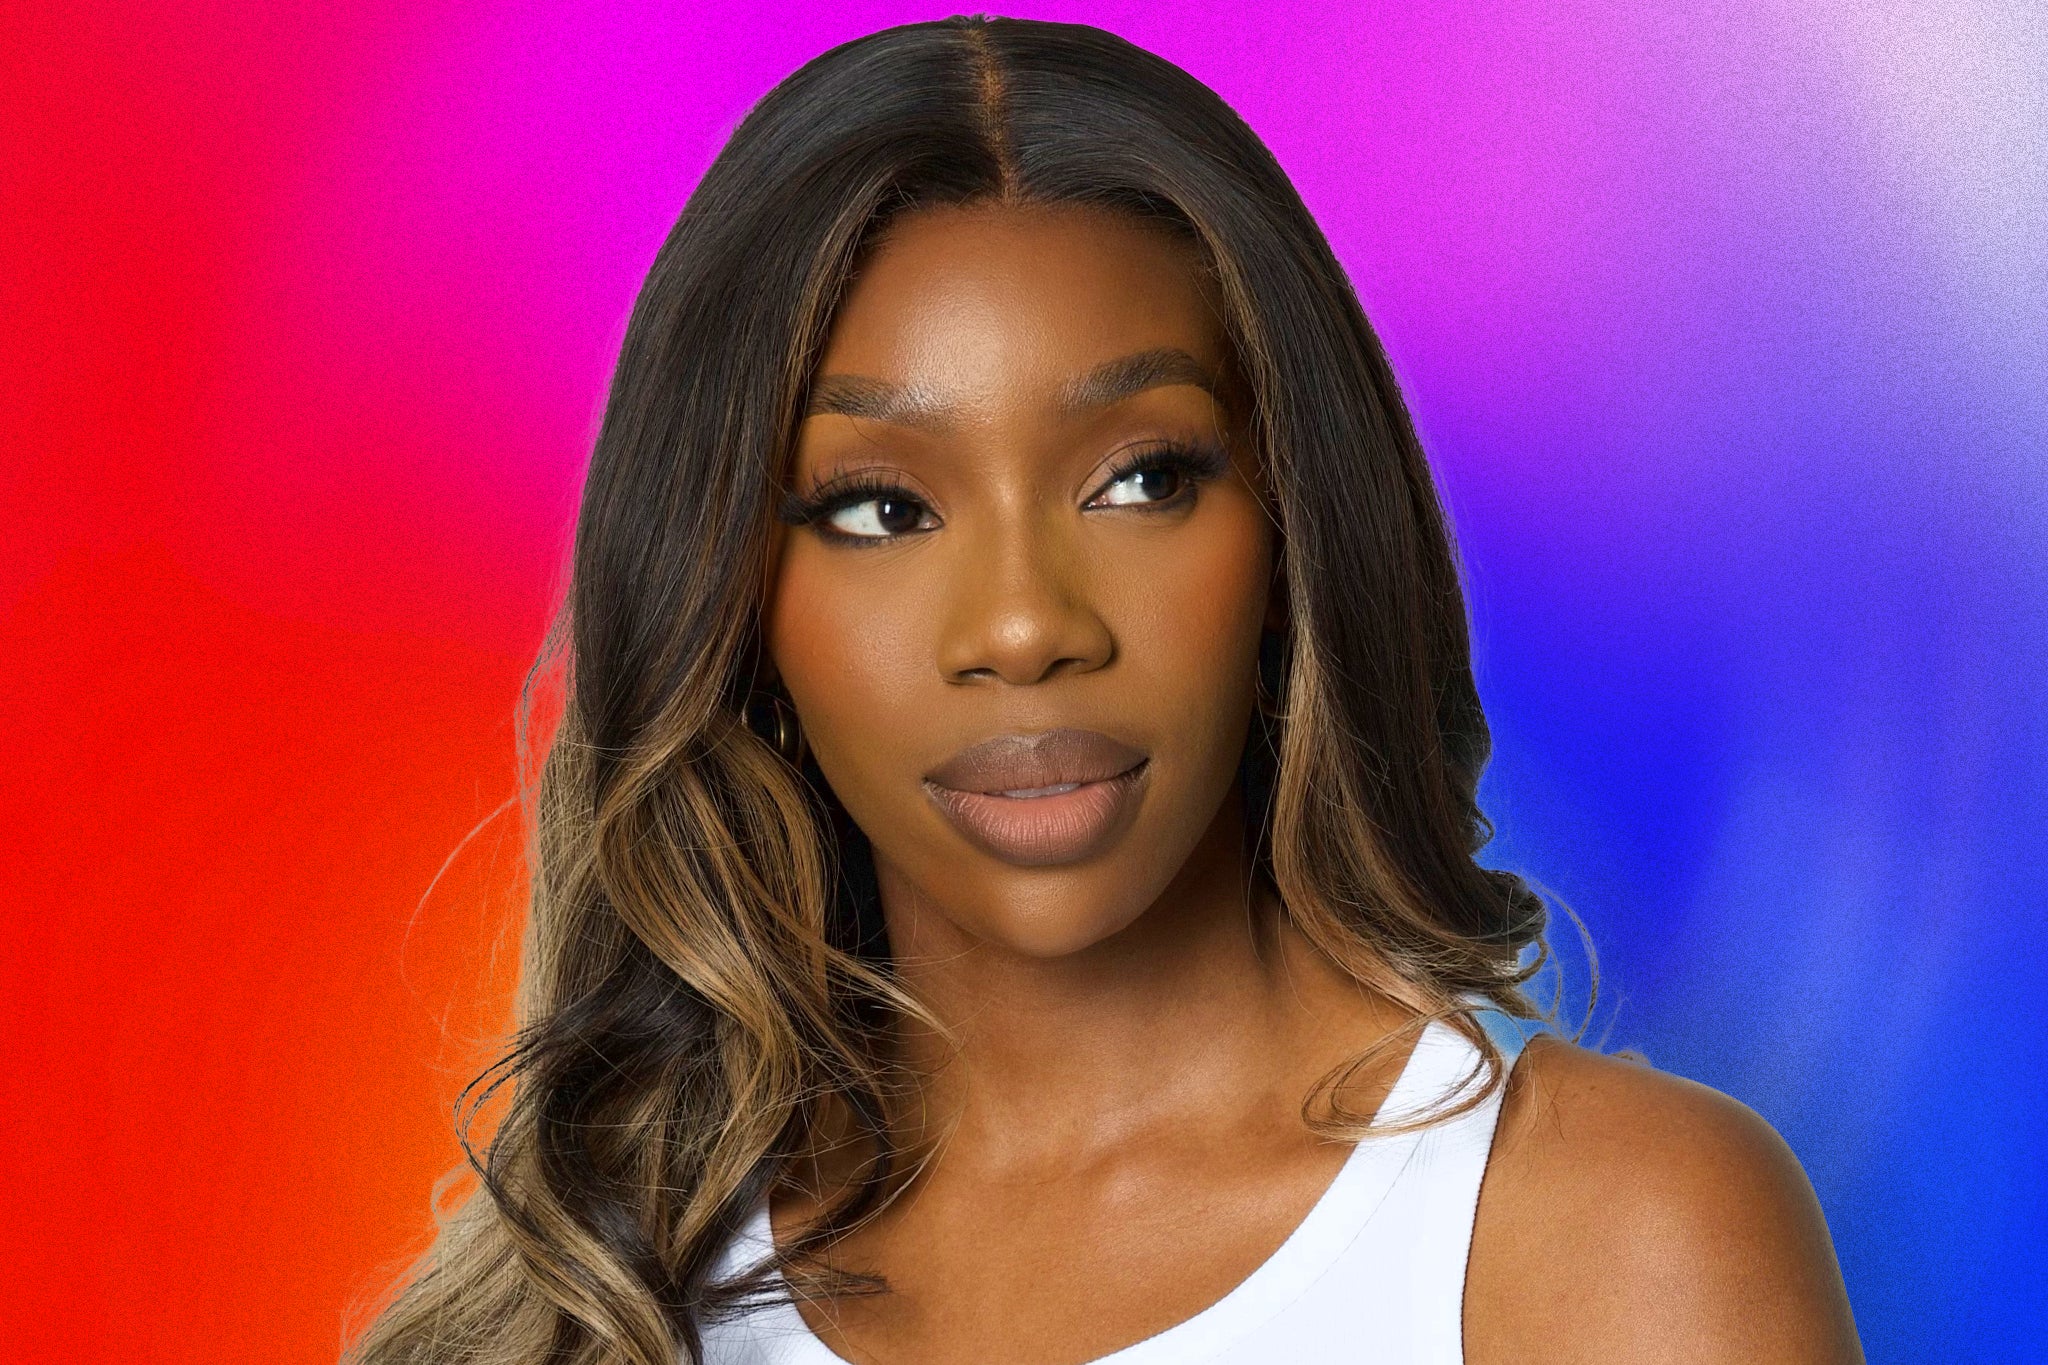 Yewande Biala thought she was unique in never having had an orgasm